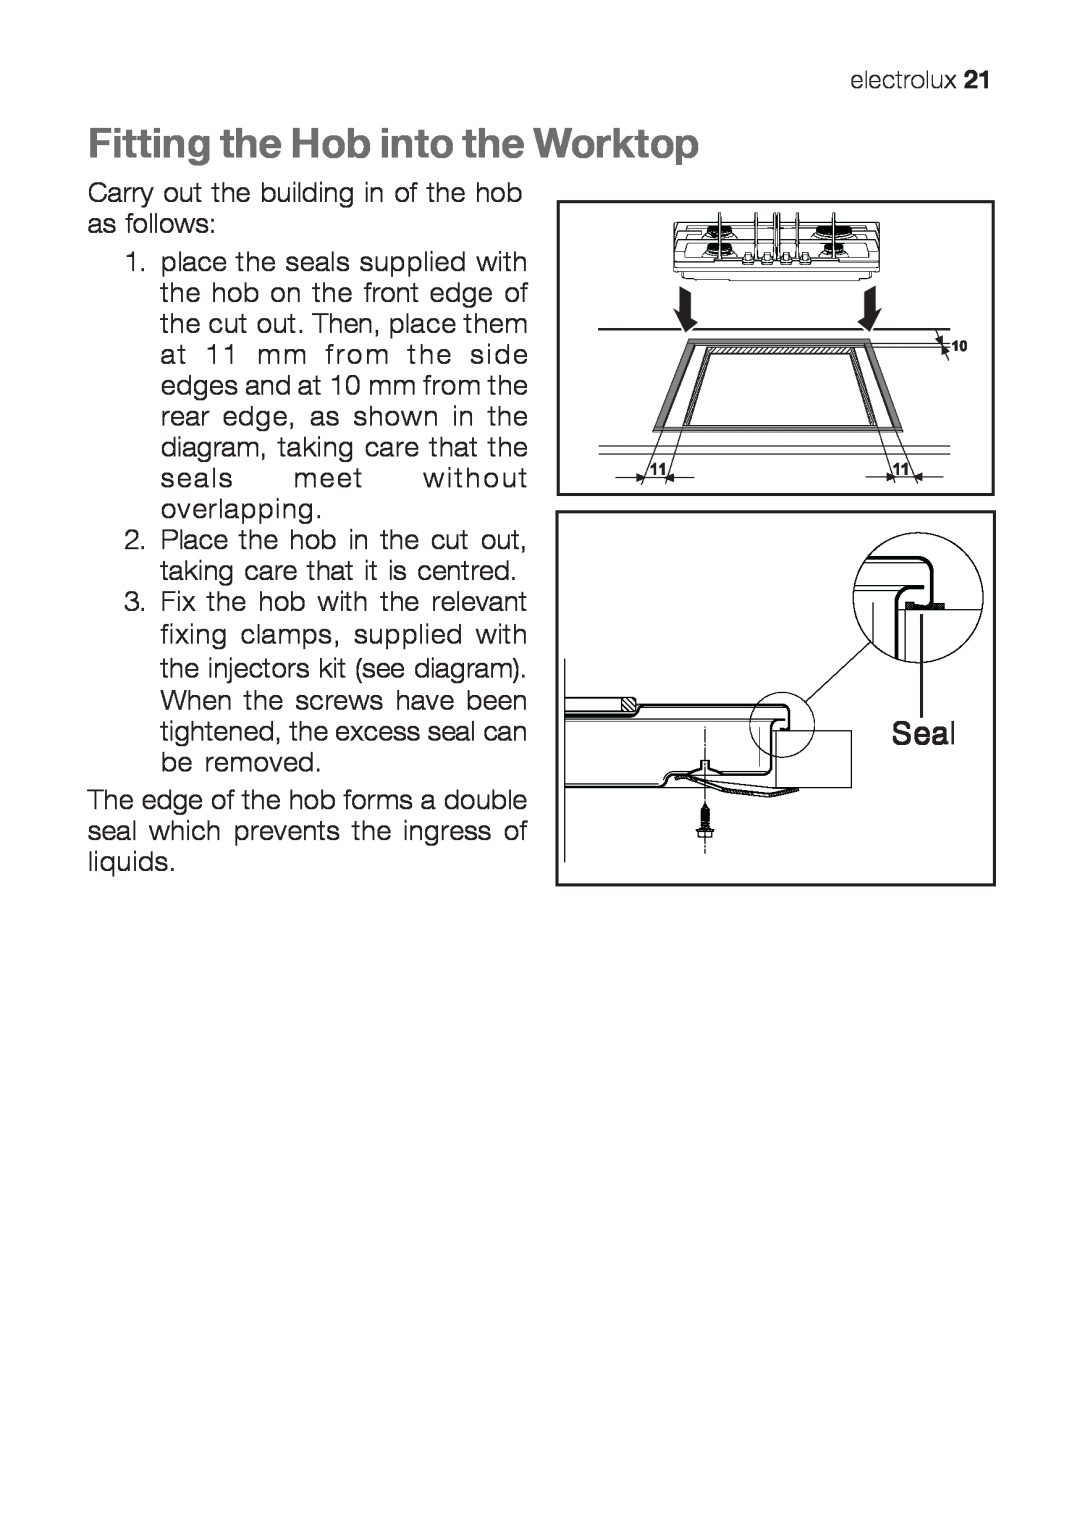 Electrolux EHG 6412, EHG 6402, EHG 6832 manual Fitting the Hob into the Worktop, Seal 